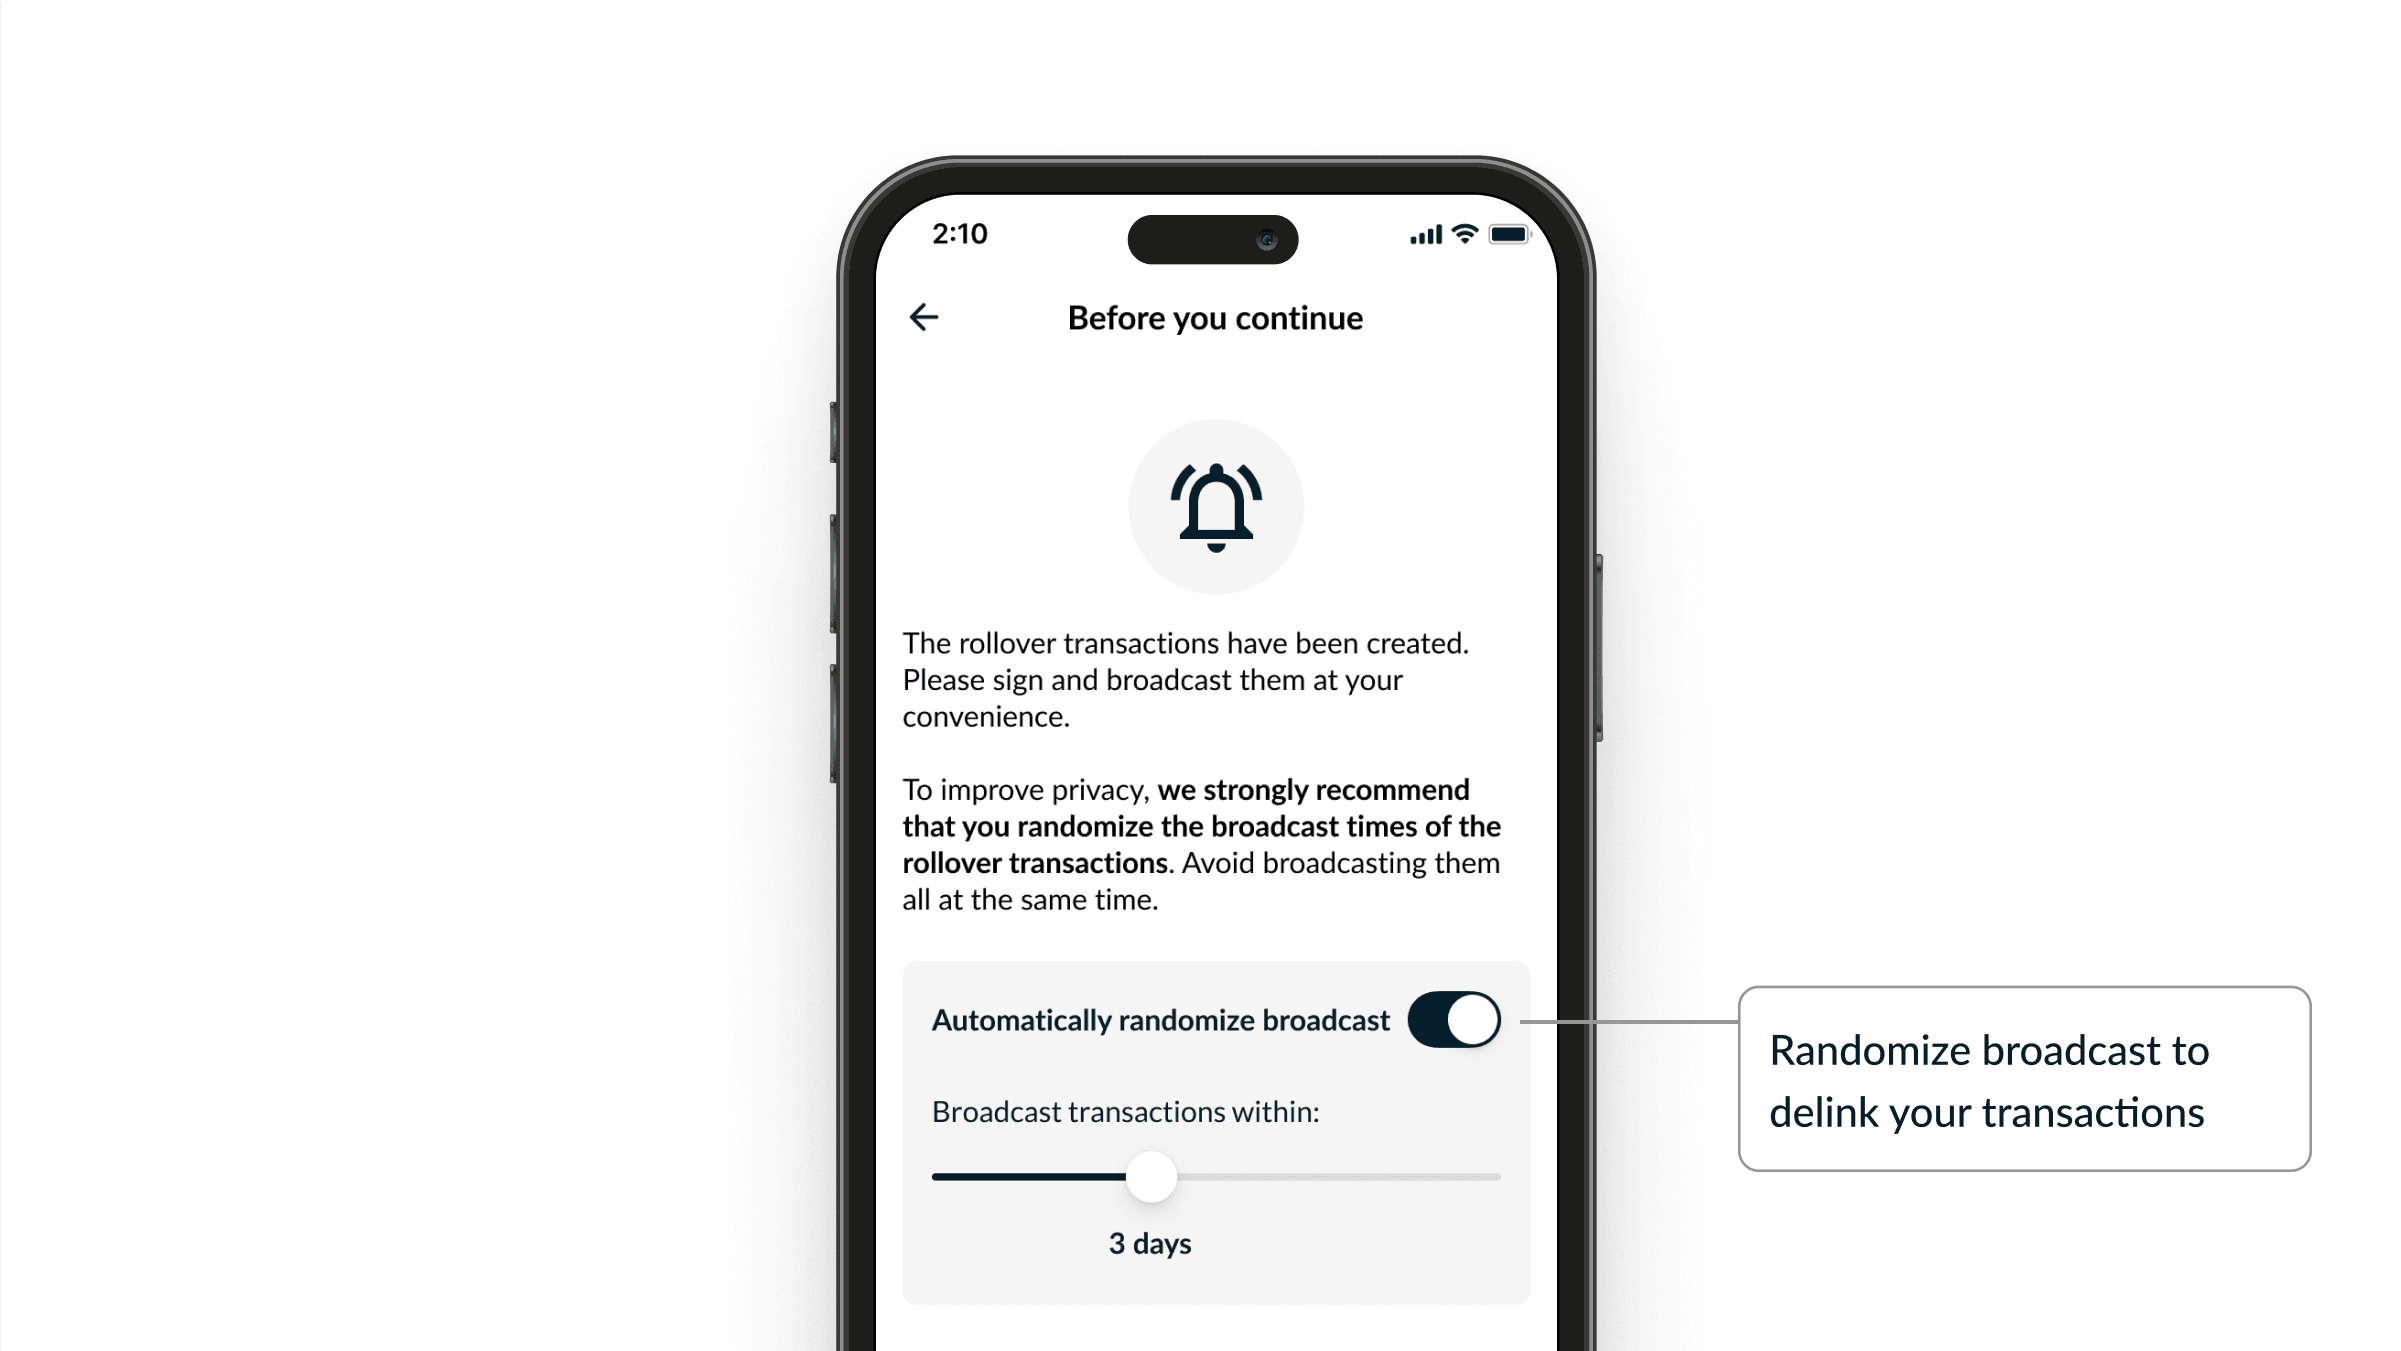 Nunchuk Introduces Automated Wallet Rollover with Advanced Coin Control